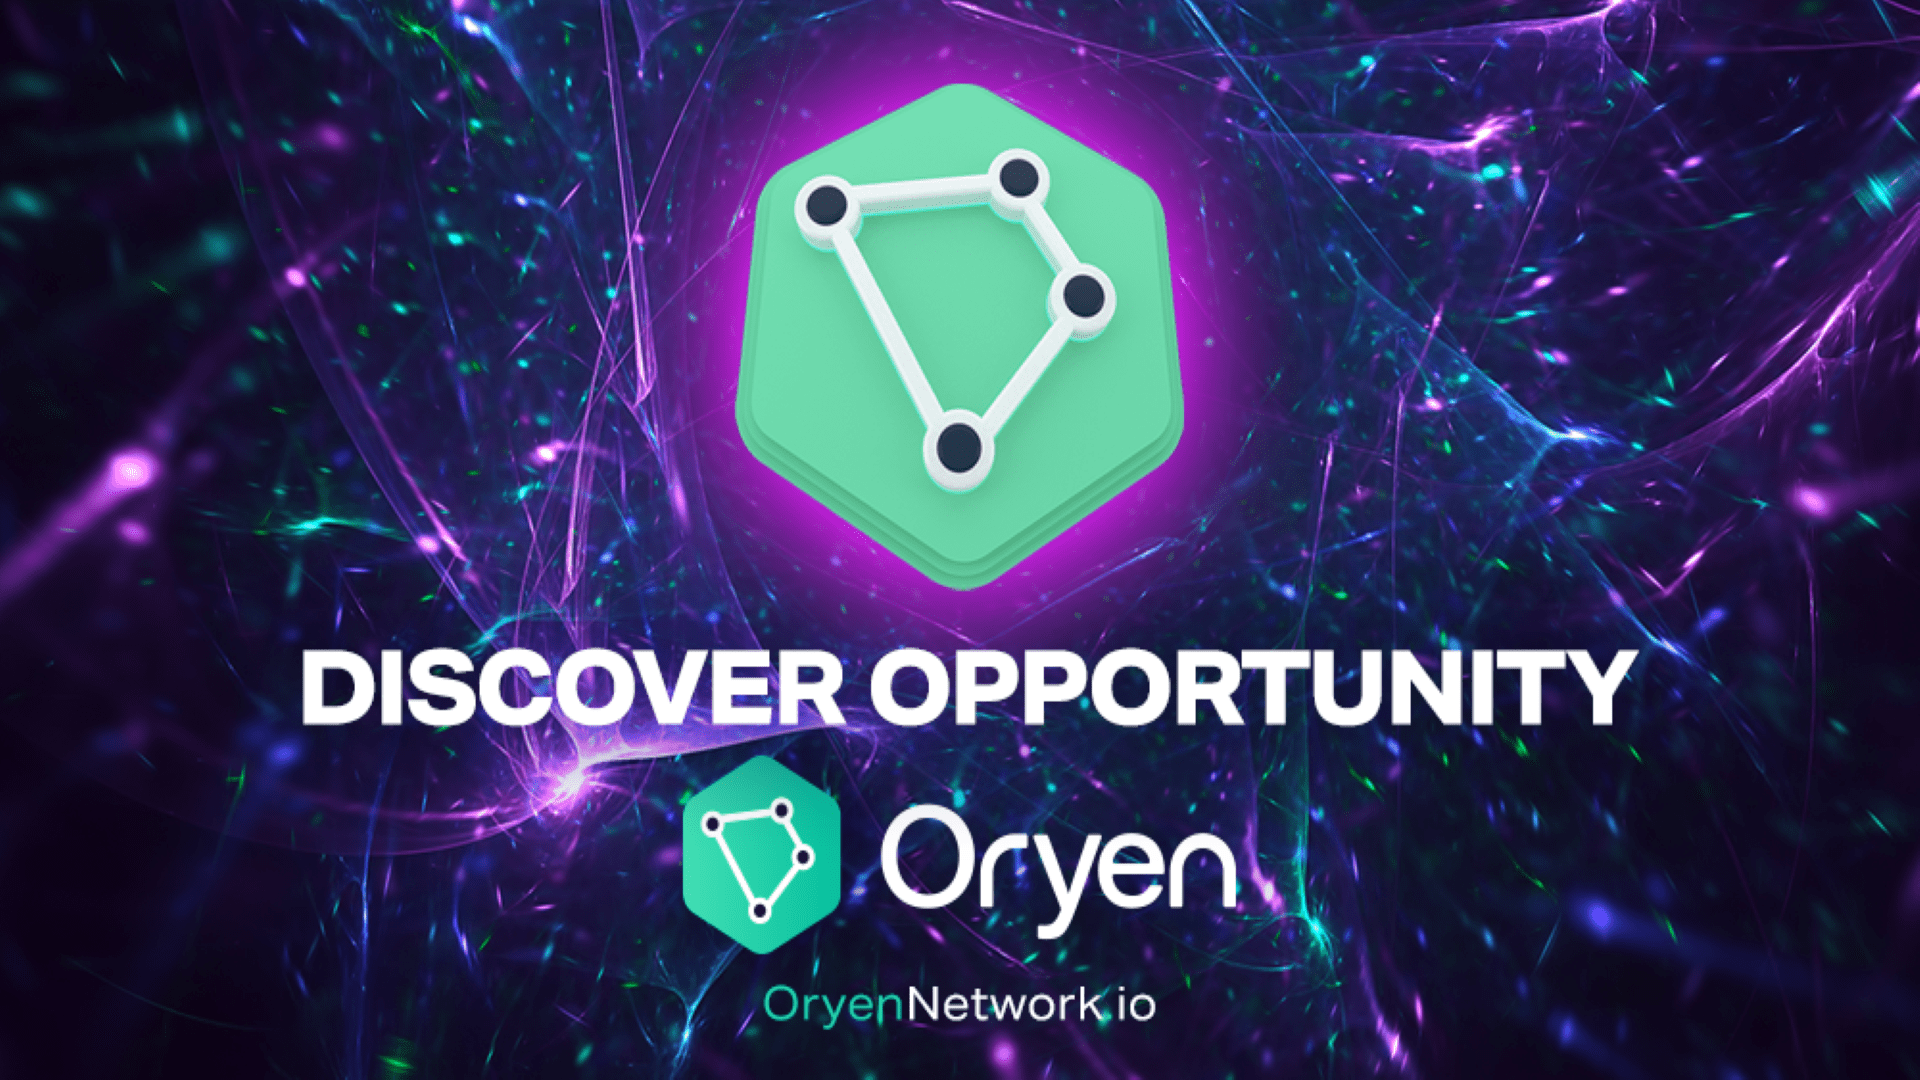 Oryen Network ORY Presale Live, Uniswap (UNI), And Chainlink (LINK) Likely Partnerships